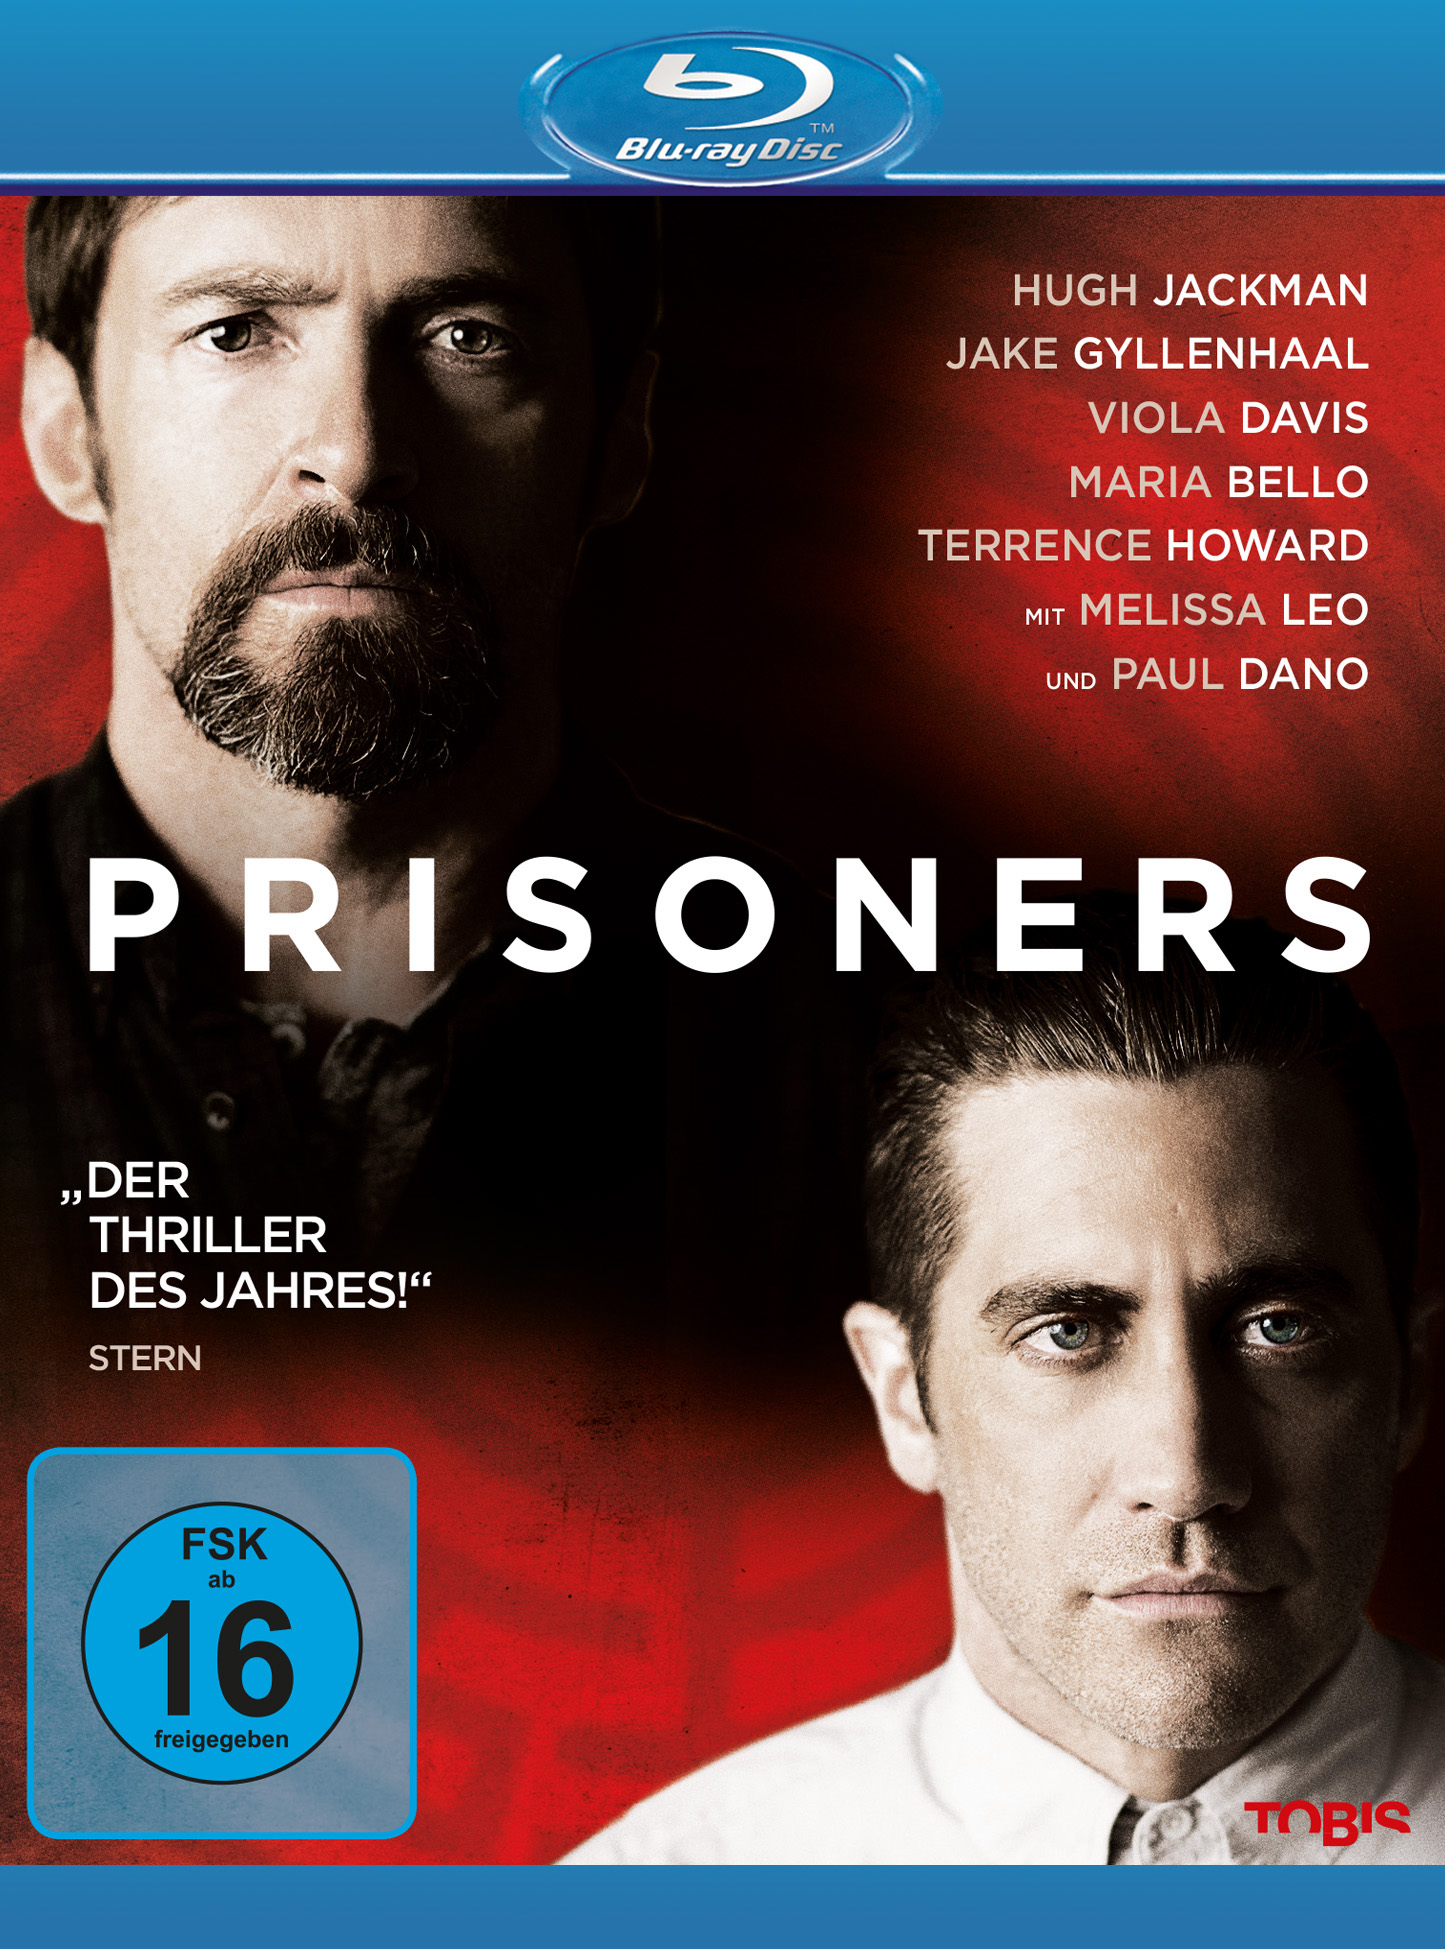 Prisoners – Blu-Ray Review